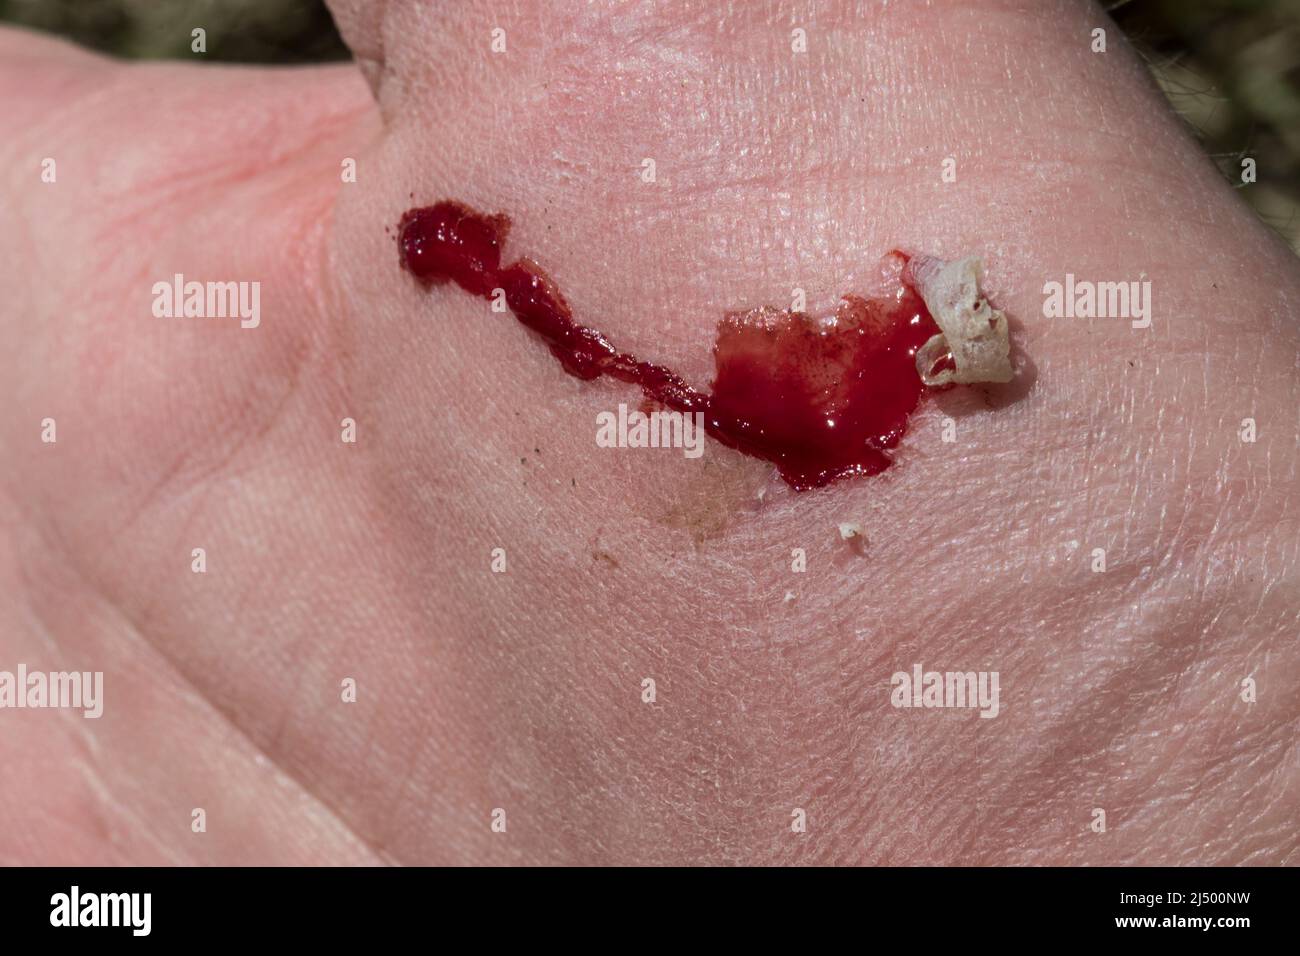 Cut on hand close up with scraped skin. Stock Photo